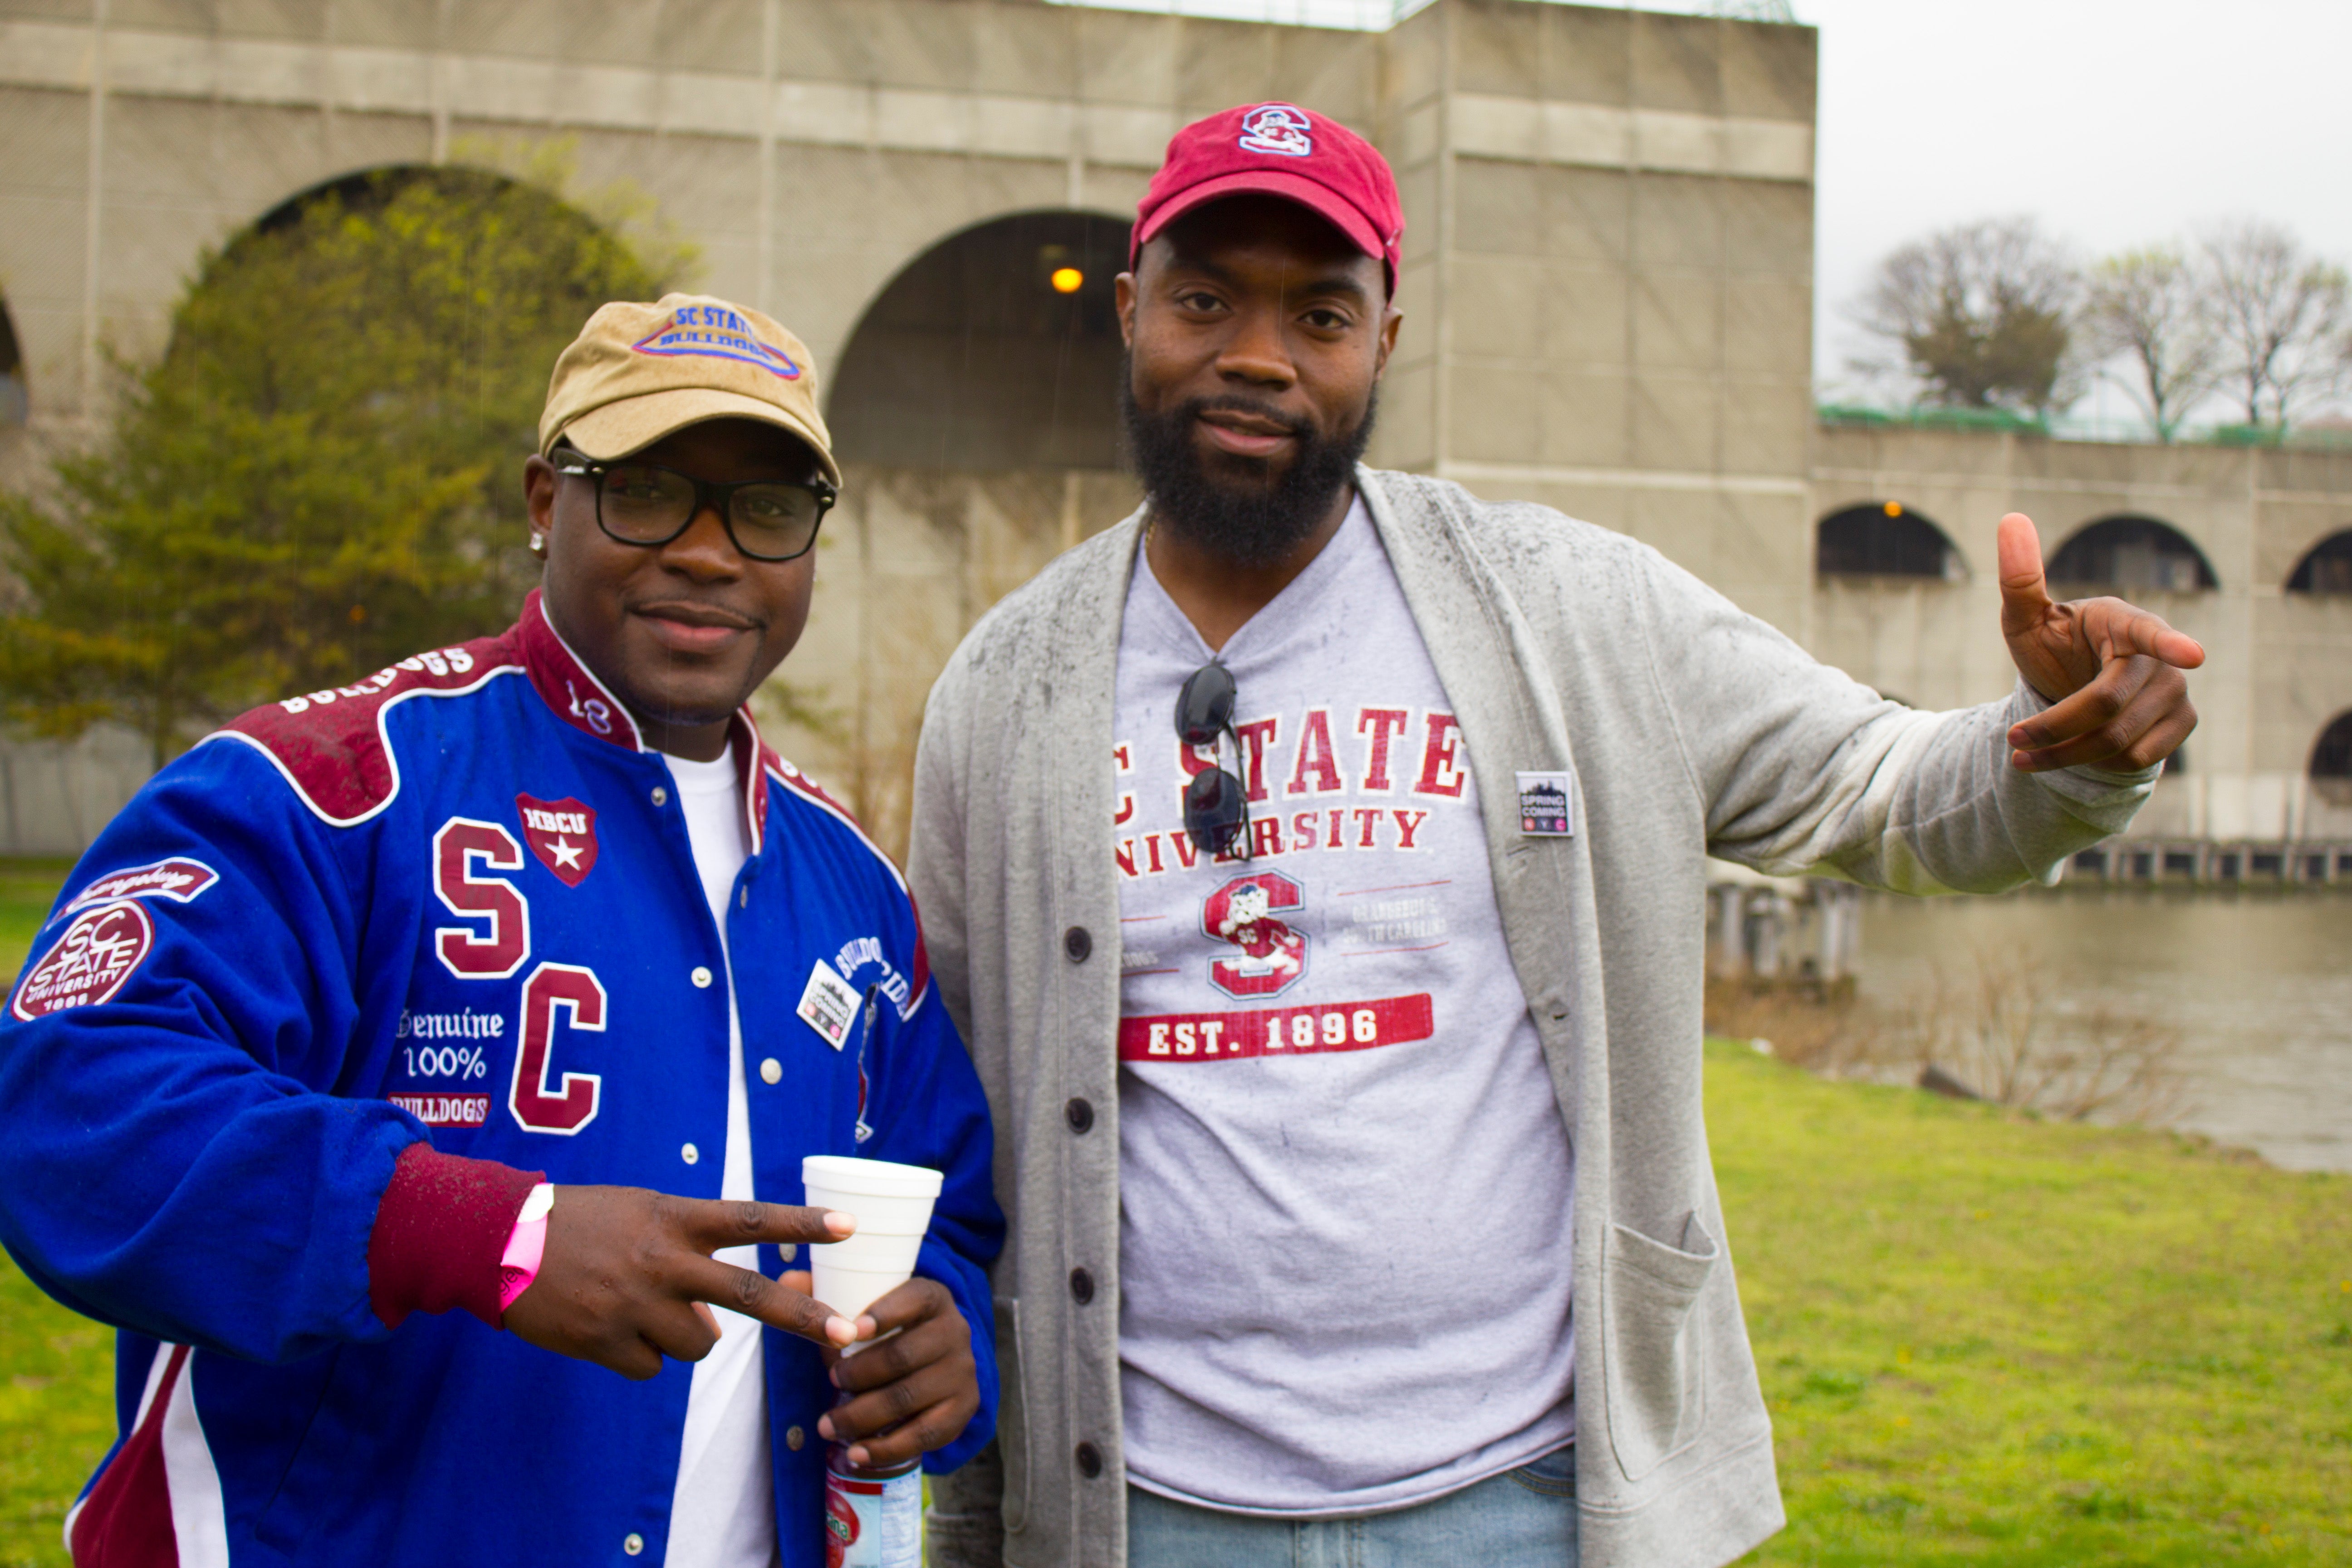 Photos From The HBCU Springcoming 2017
